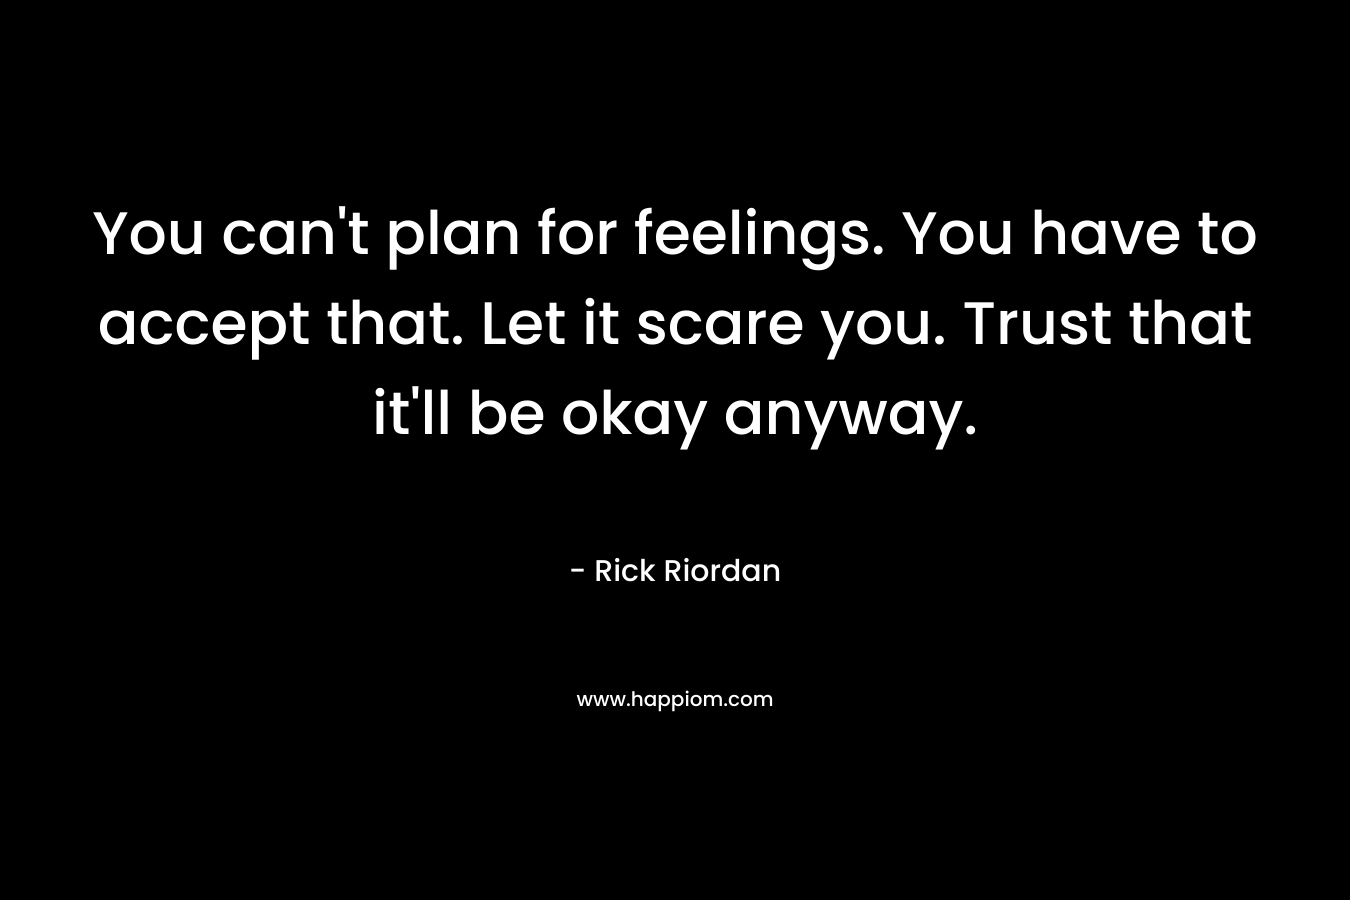 You can’t plan for feelings. You have to accept that. Let it scare you. Trust that it’ll be okay anyway. – Rick Riordan